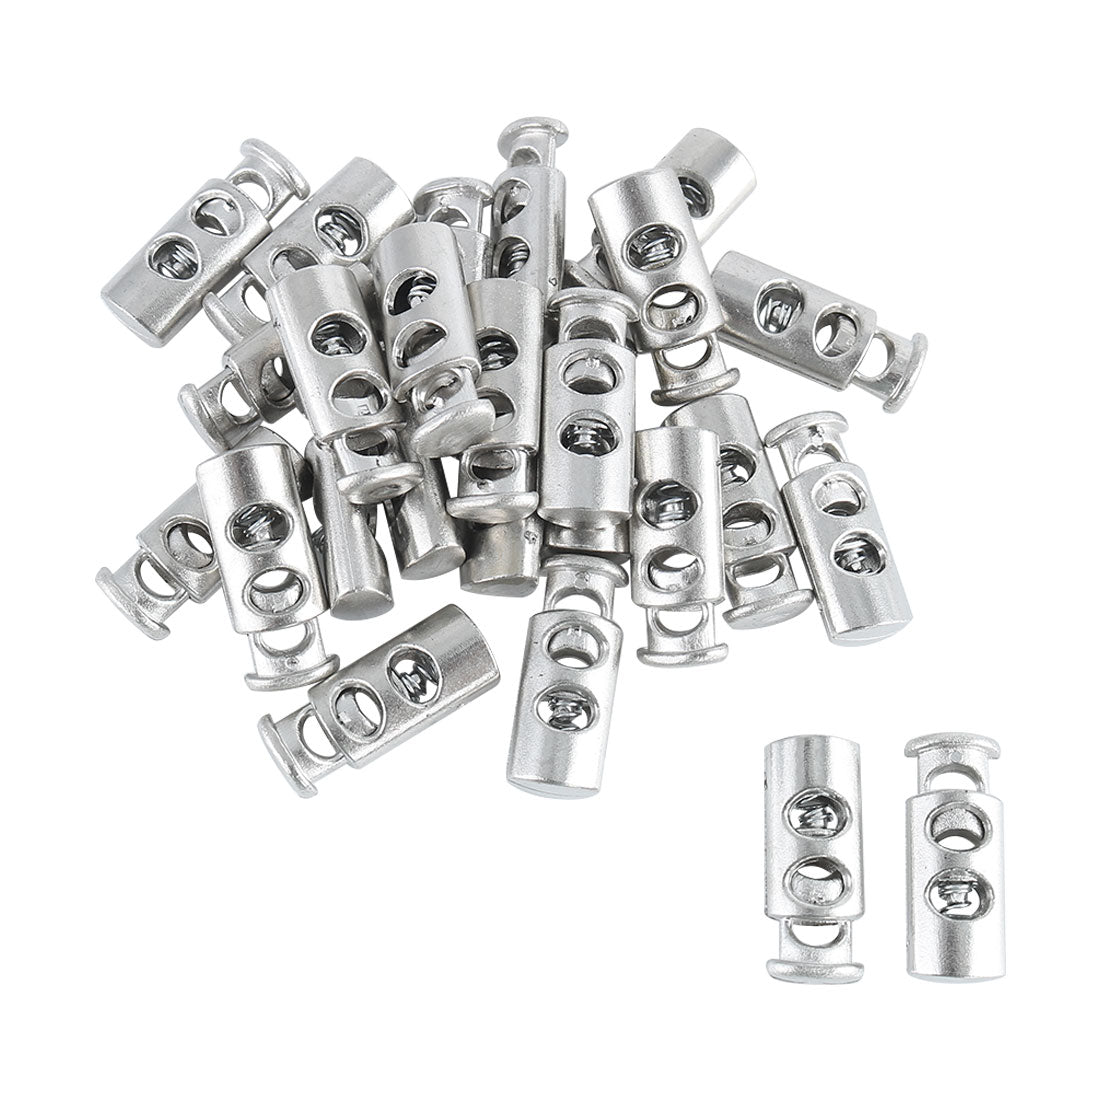 uxcell Uxcell 25pcs Plastic Cord Locks Stopper Spring Fasteners Slider Organizers Silver Tone